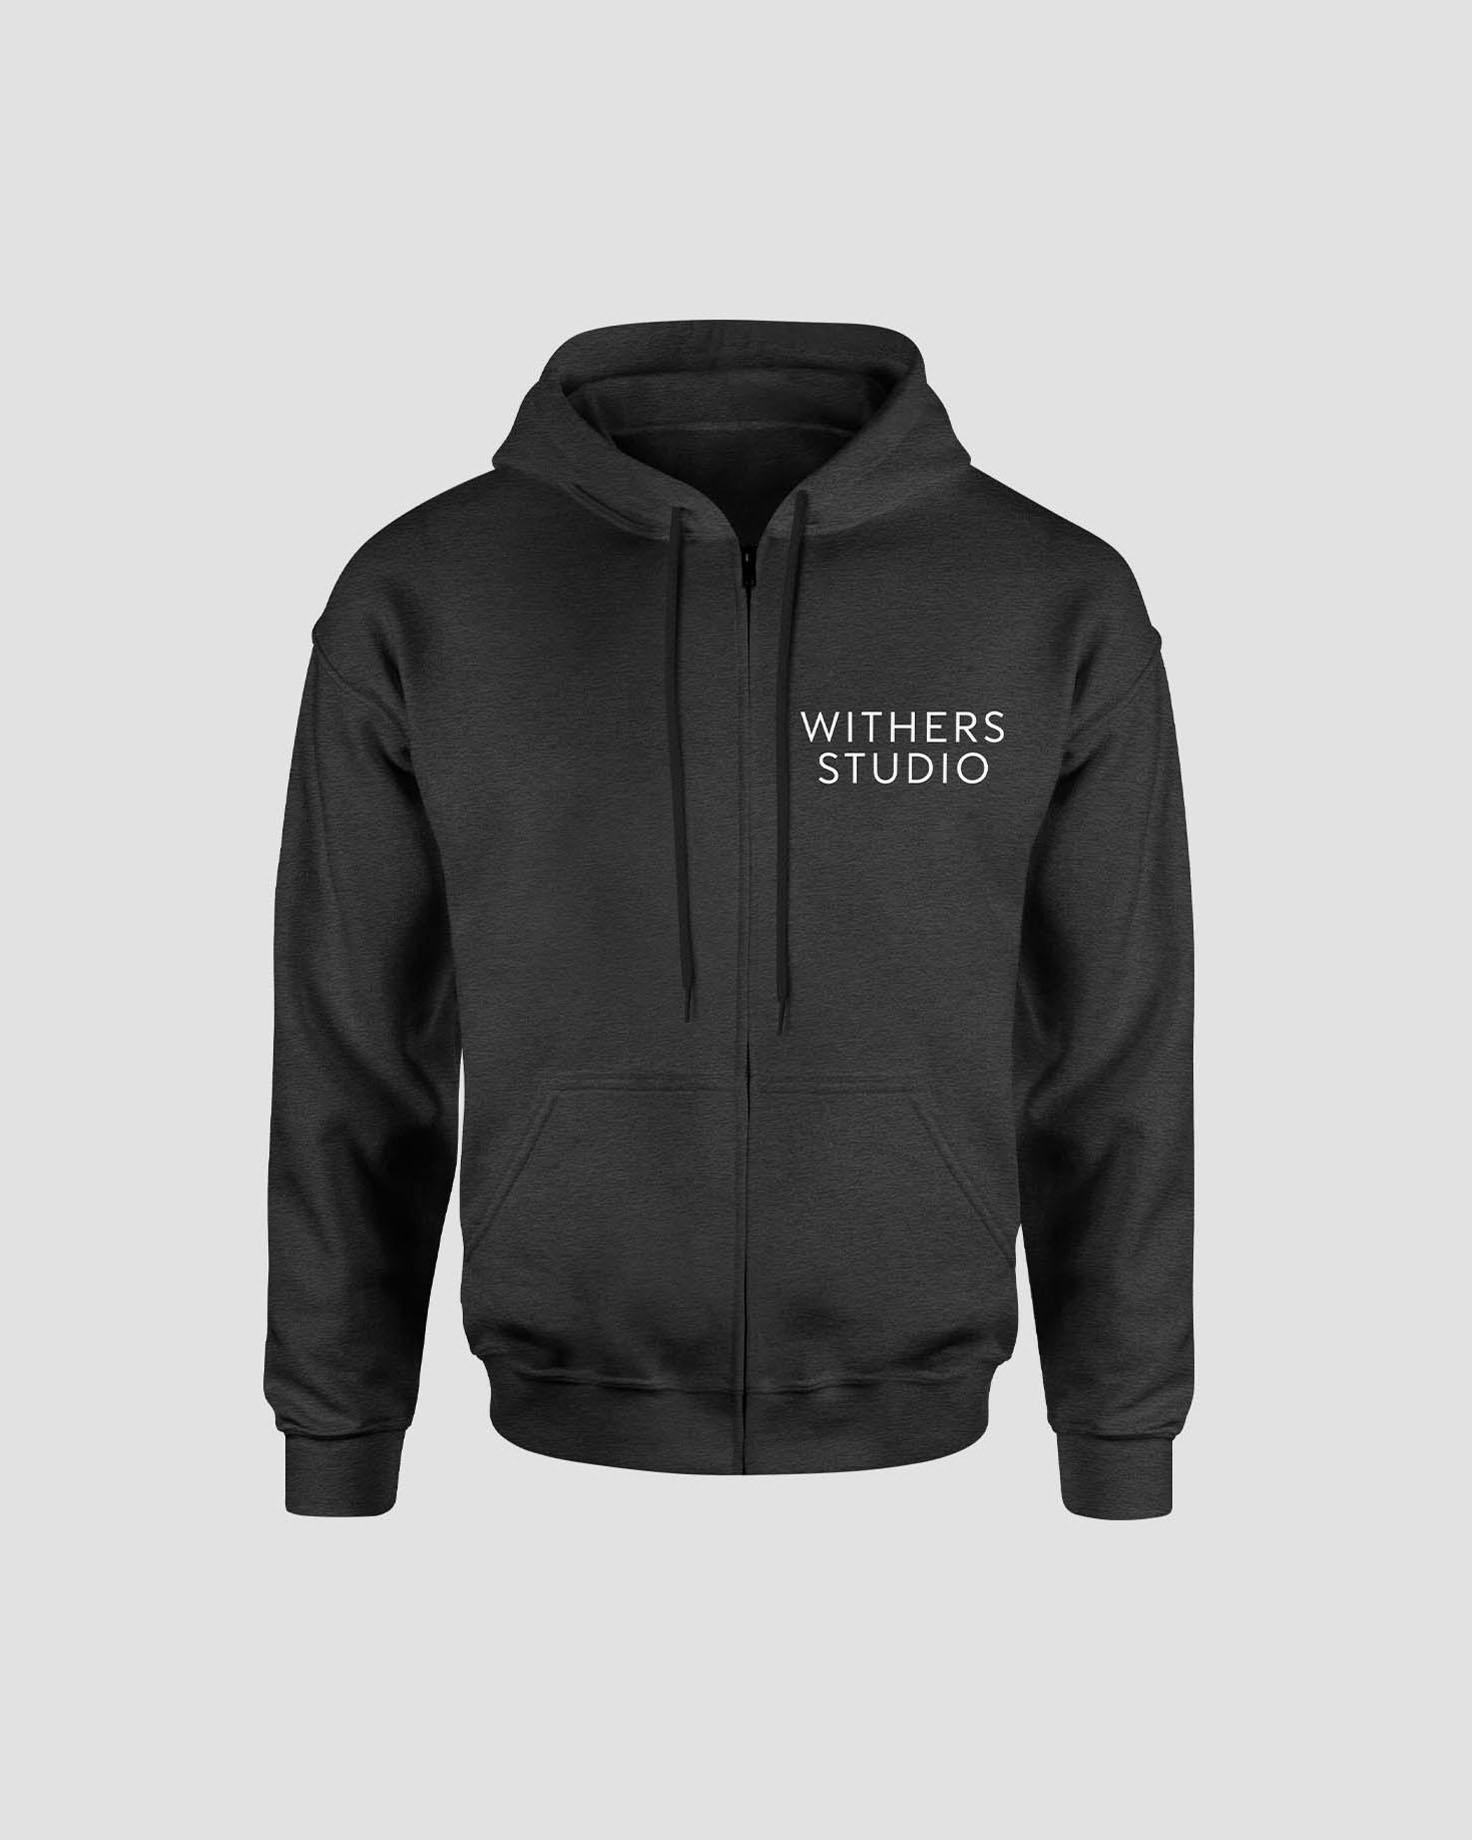 Brand Sweatshirt mockup - Withers Studio - Whiskey and Red Small Business Branding and Website Design Packages